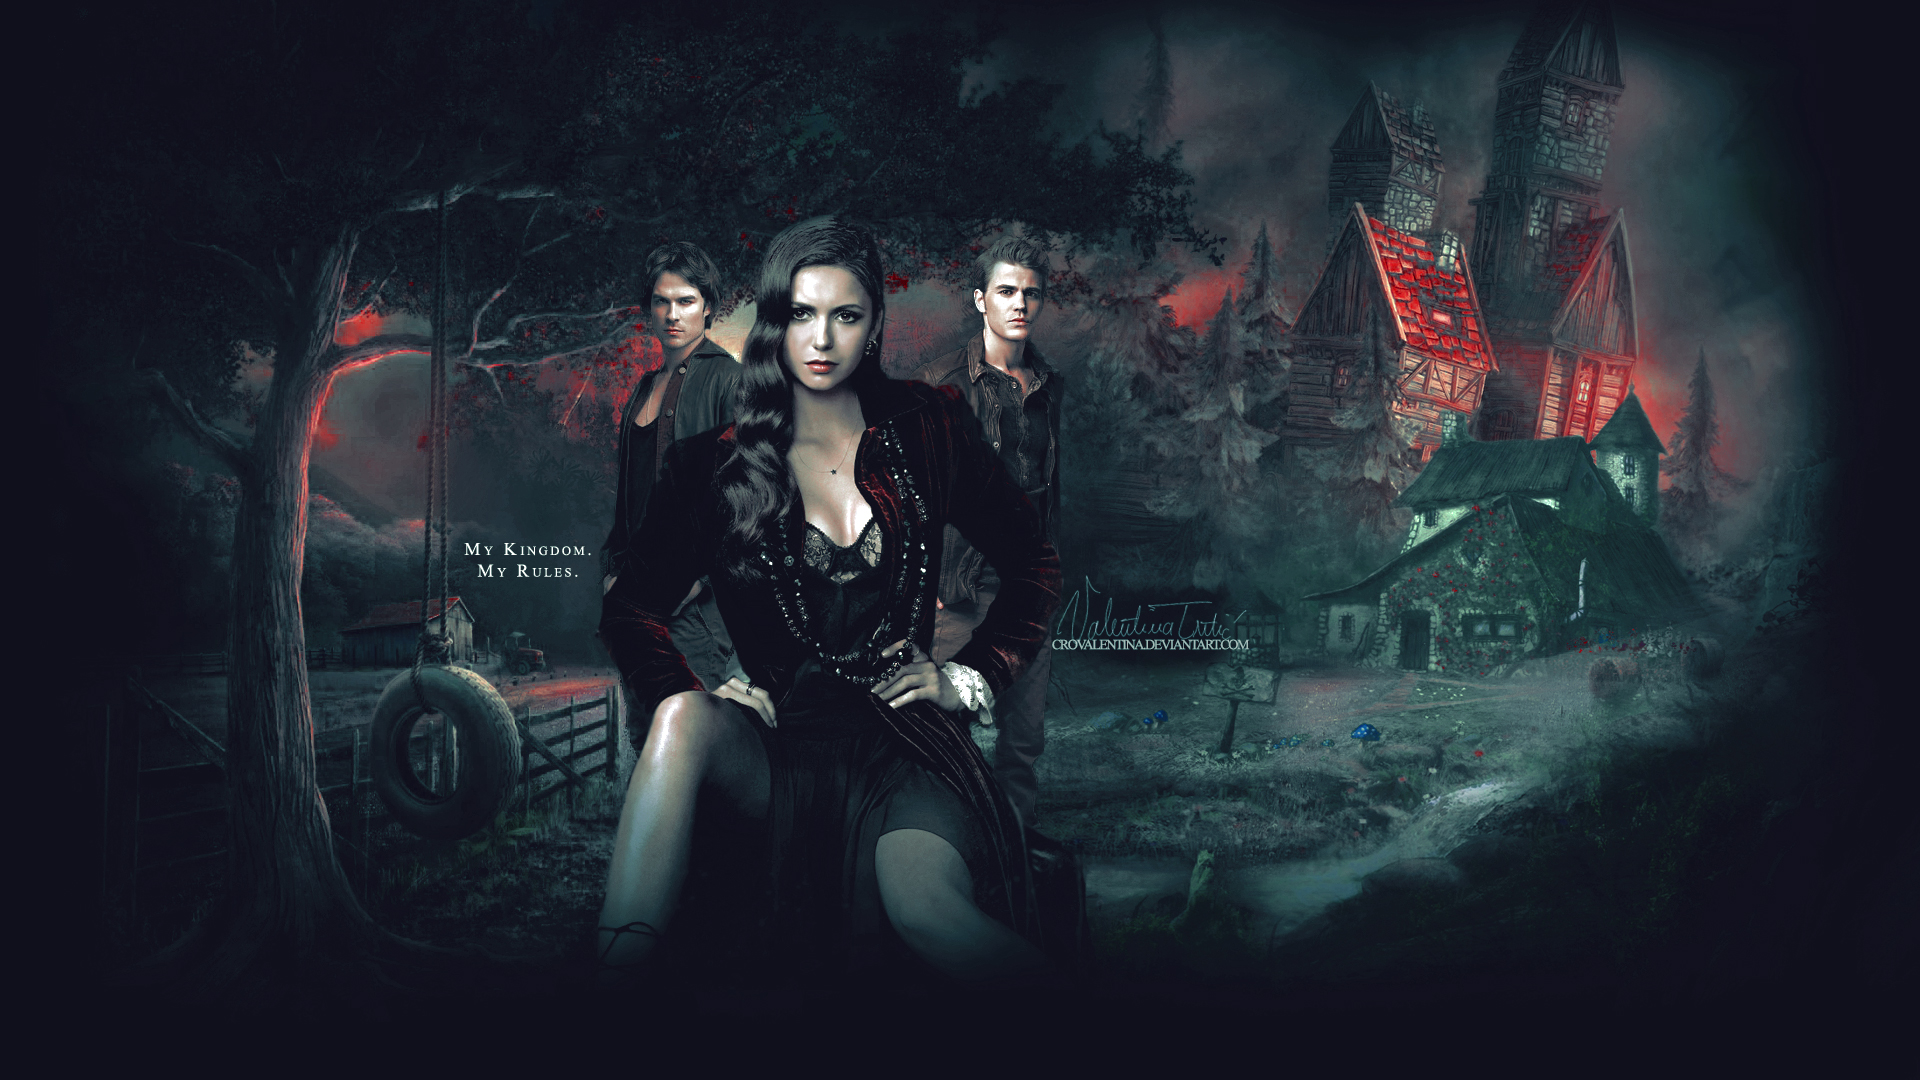 The Vampire Diaries Image HD Wallpaper And